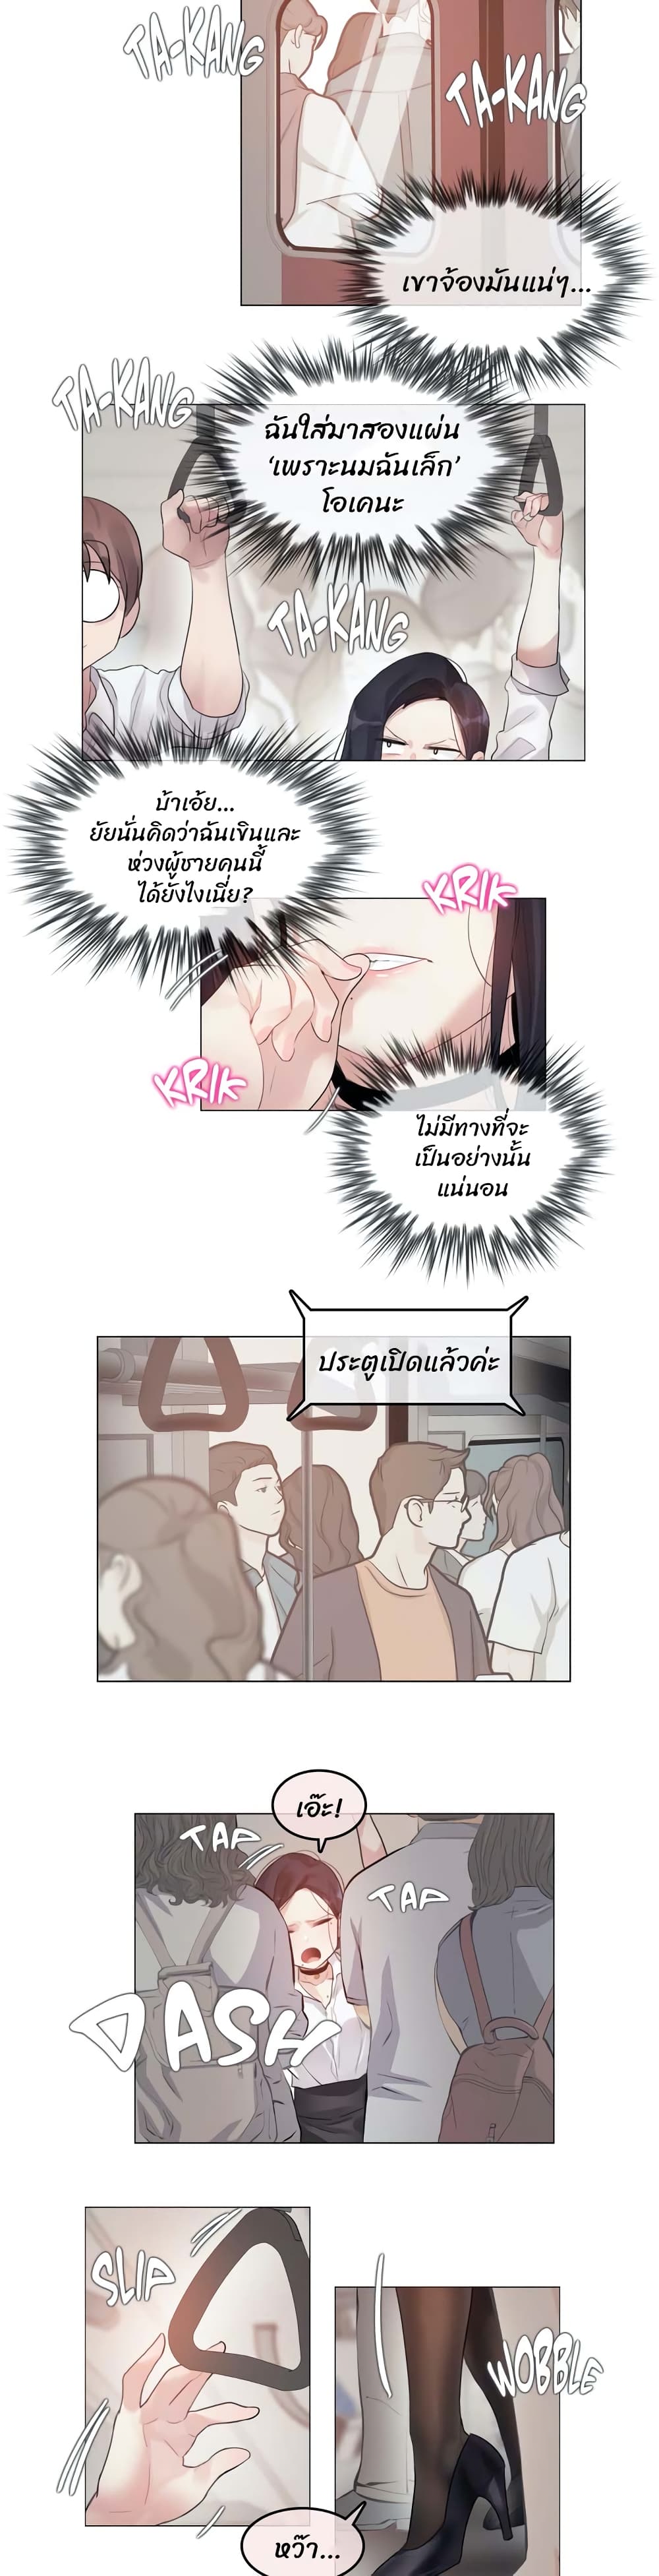 A Pervert's Daily Life 98 (9)